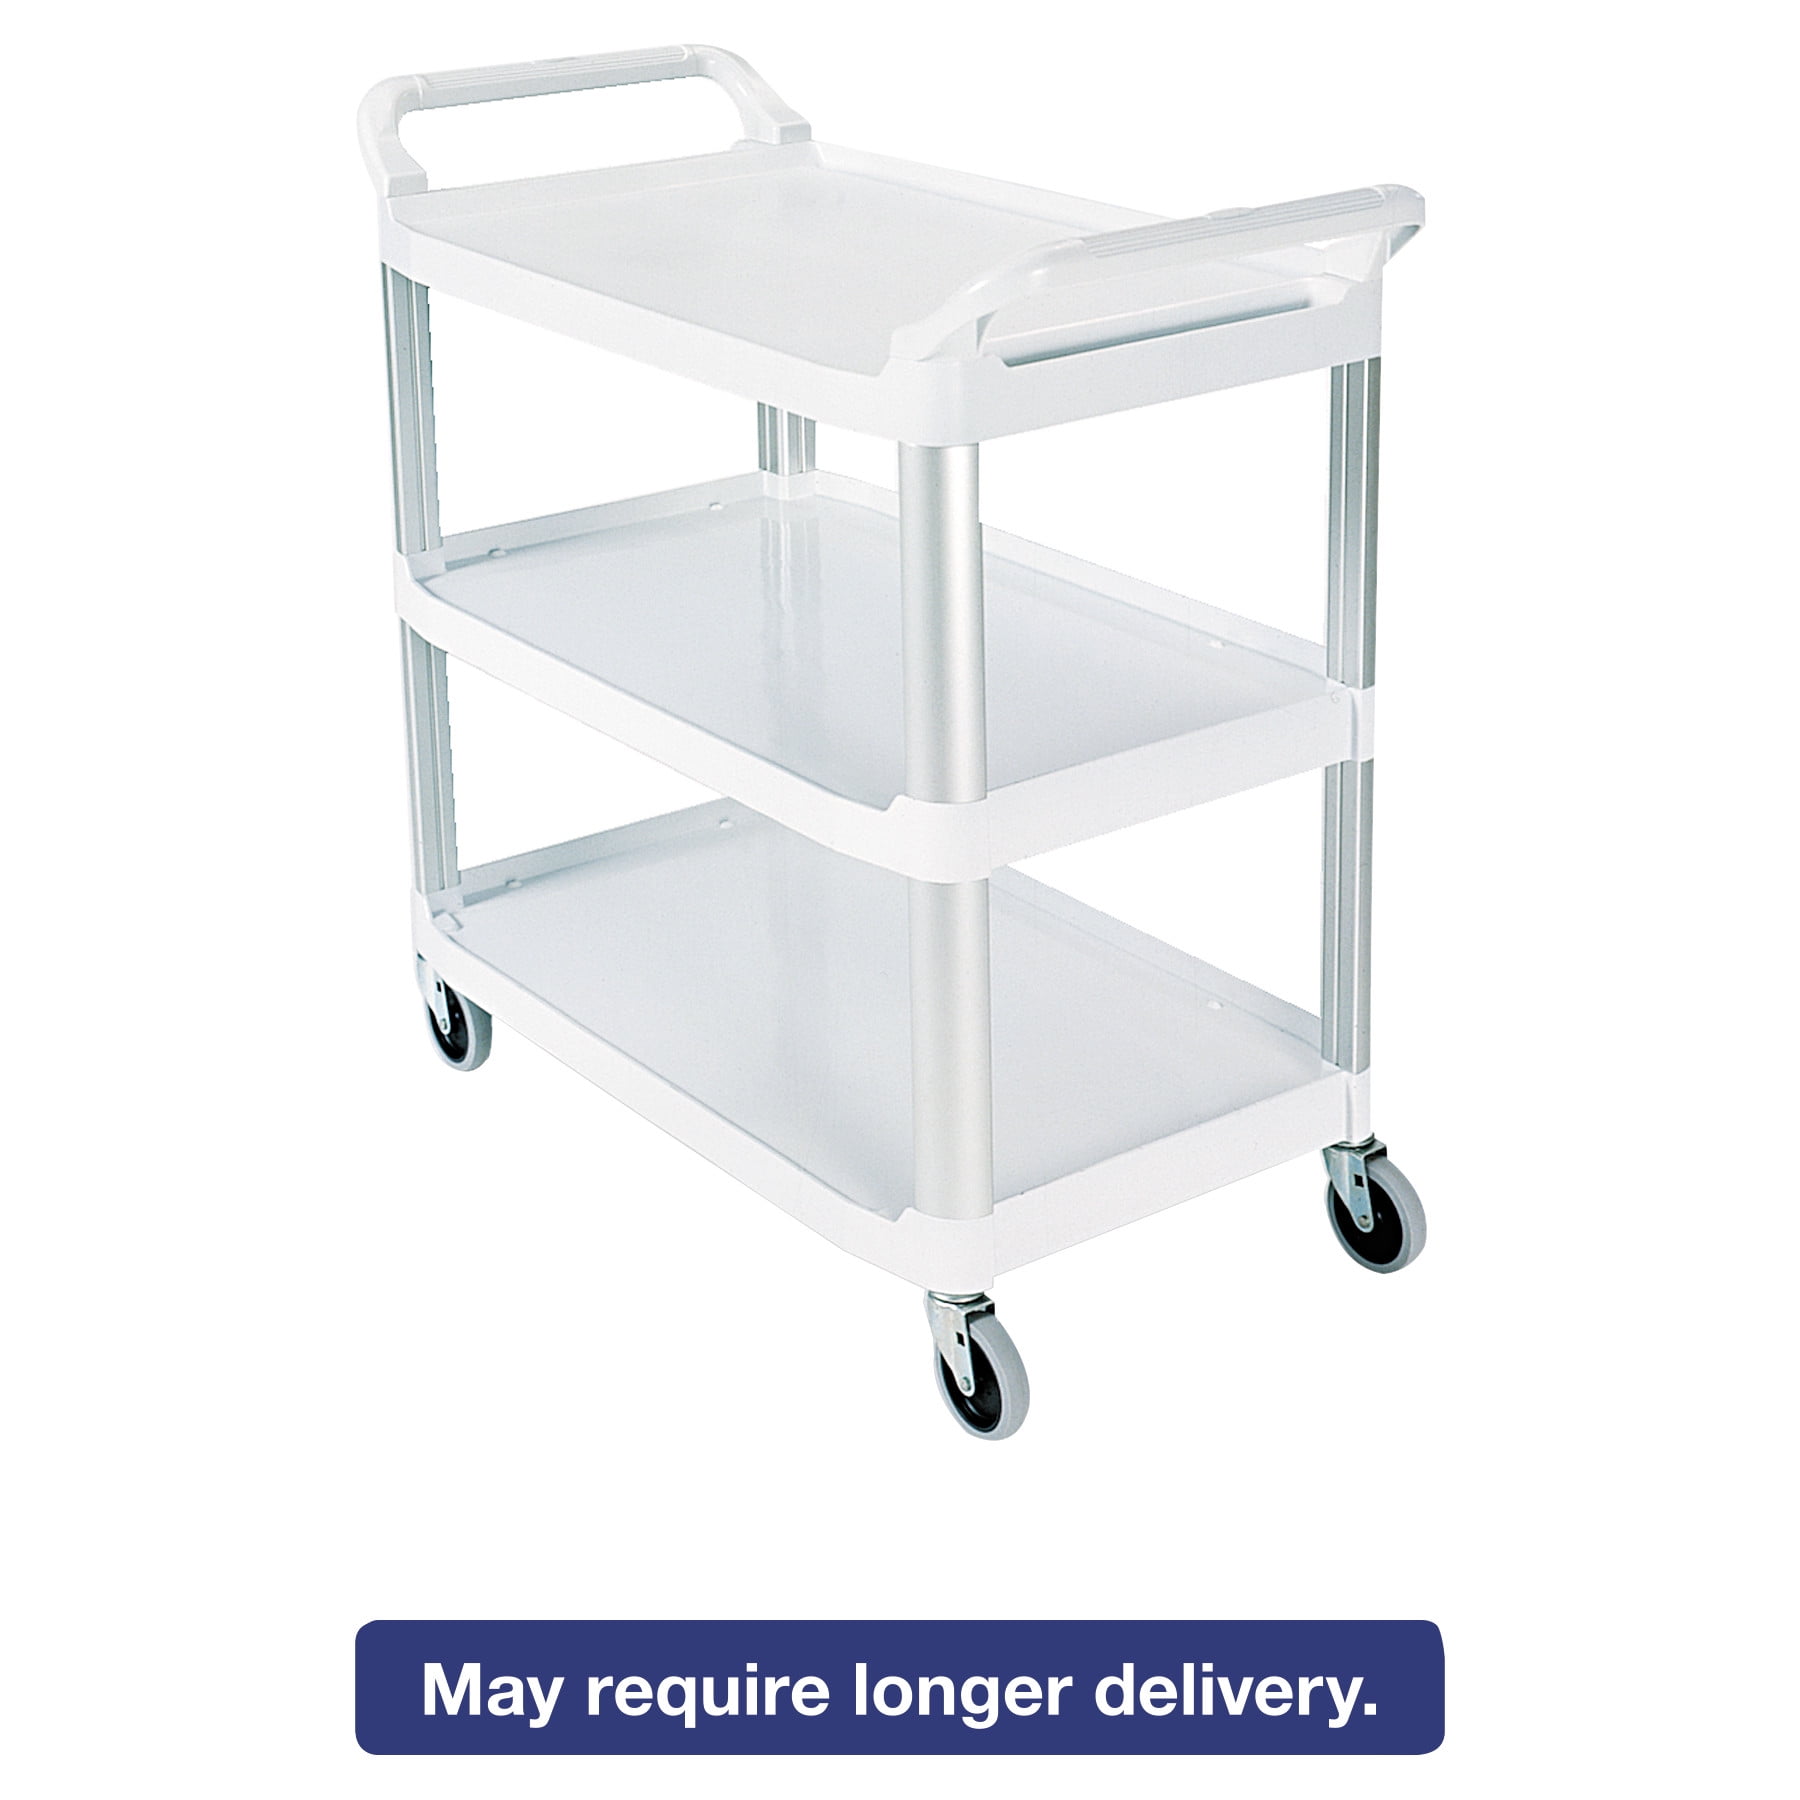 VEVOR 2 Tier 19W x 20D Pull Out Cabinet Organizer, Heavy Duty